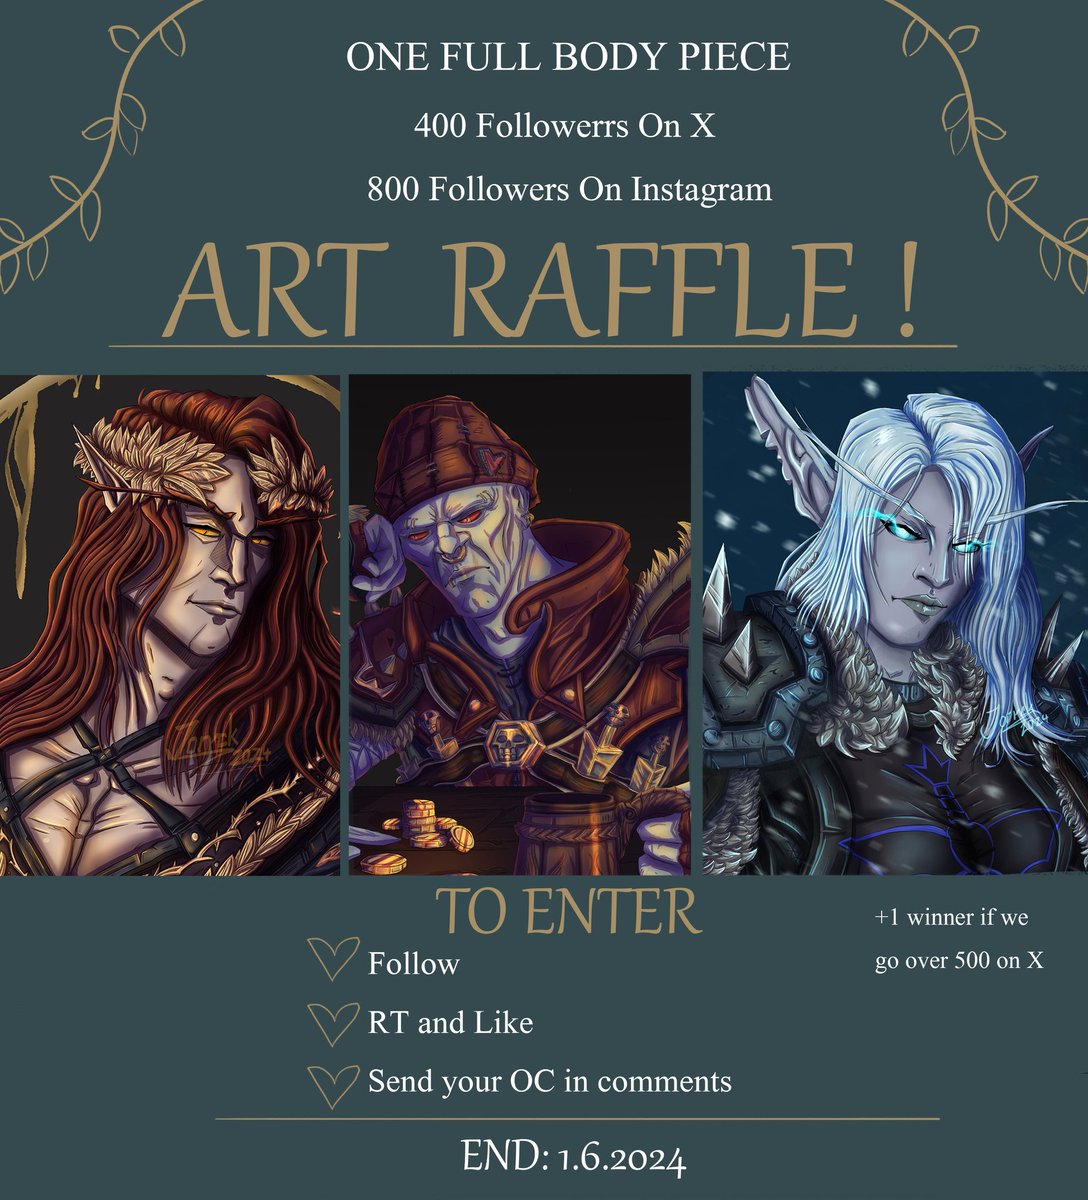 ✨Art Raffle✨  

✨To Enter✨
• Follow
• Share and Like 
• Send your OC in the comments

🥇Prizes 
• One Full body art piece 
+1 winner if we hit 1k till the End 

END: 1.6.2024
#artraffle #artgiveaway #warcraft #warcraftart #worldofwarcraft #originalcharacter #DnDcharacter